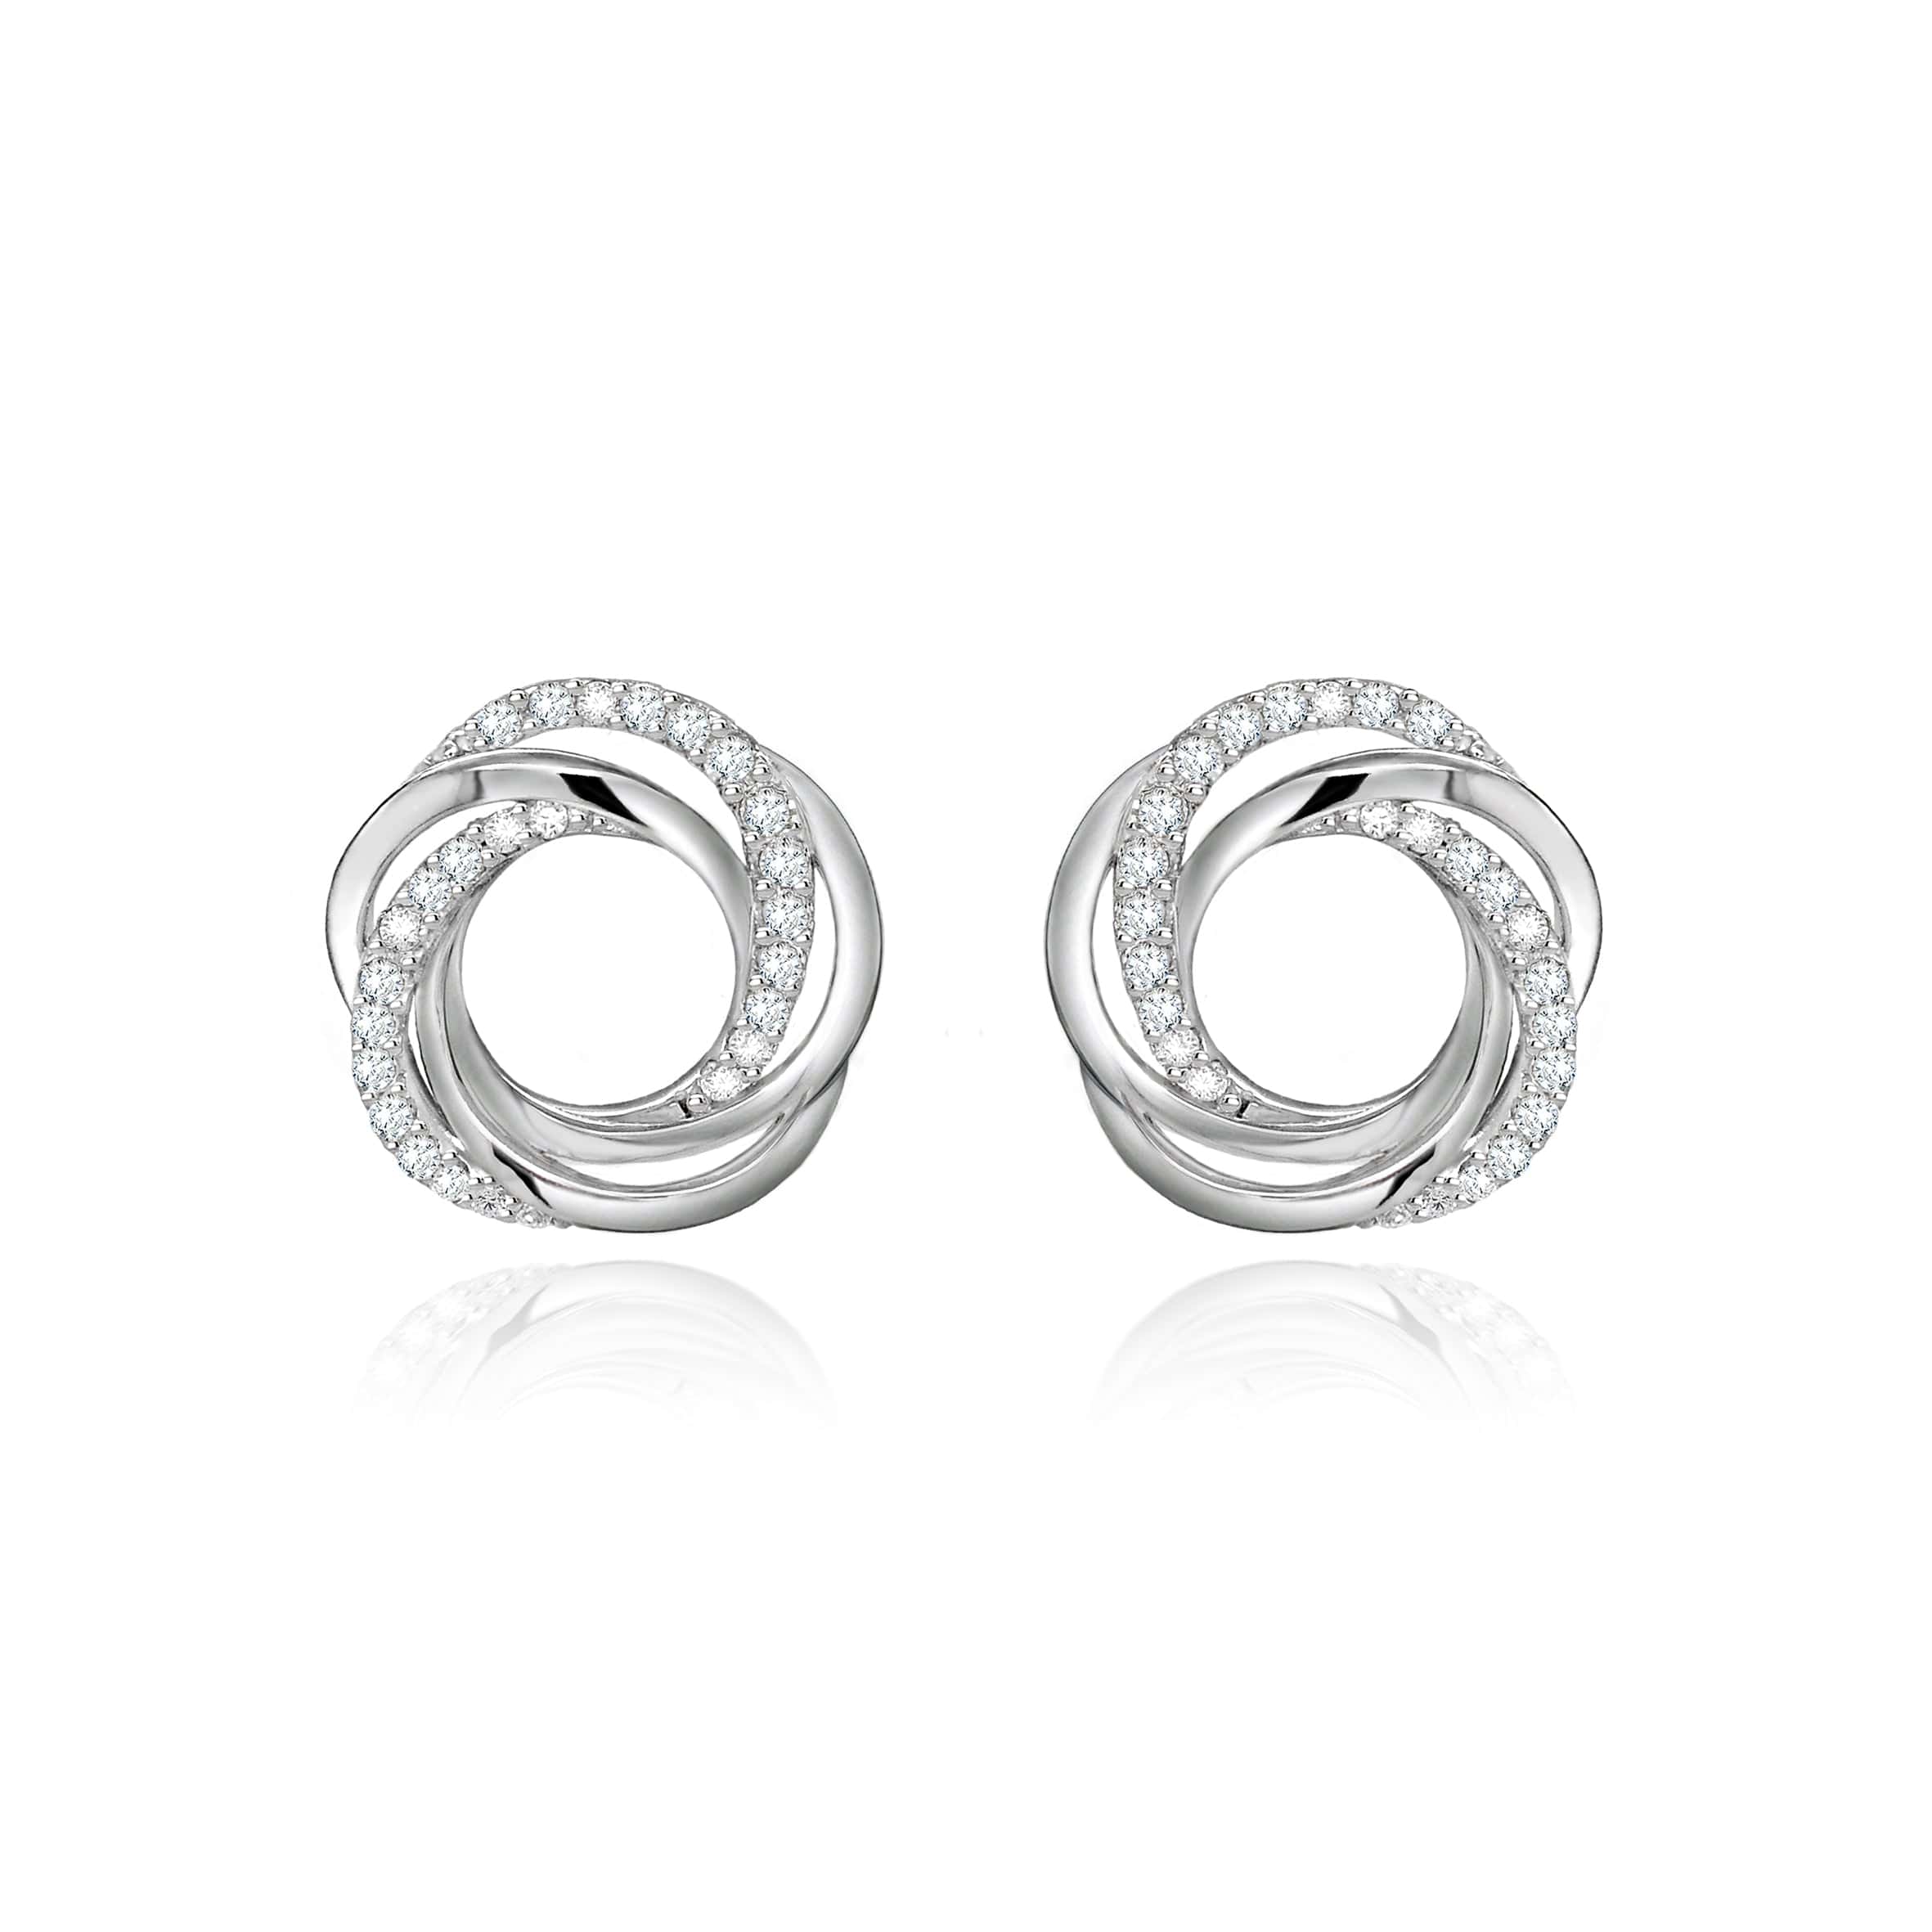 Lynora Silver Earring Sterling Silver / Clear Entwine Circle Earrings